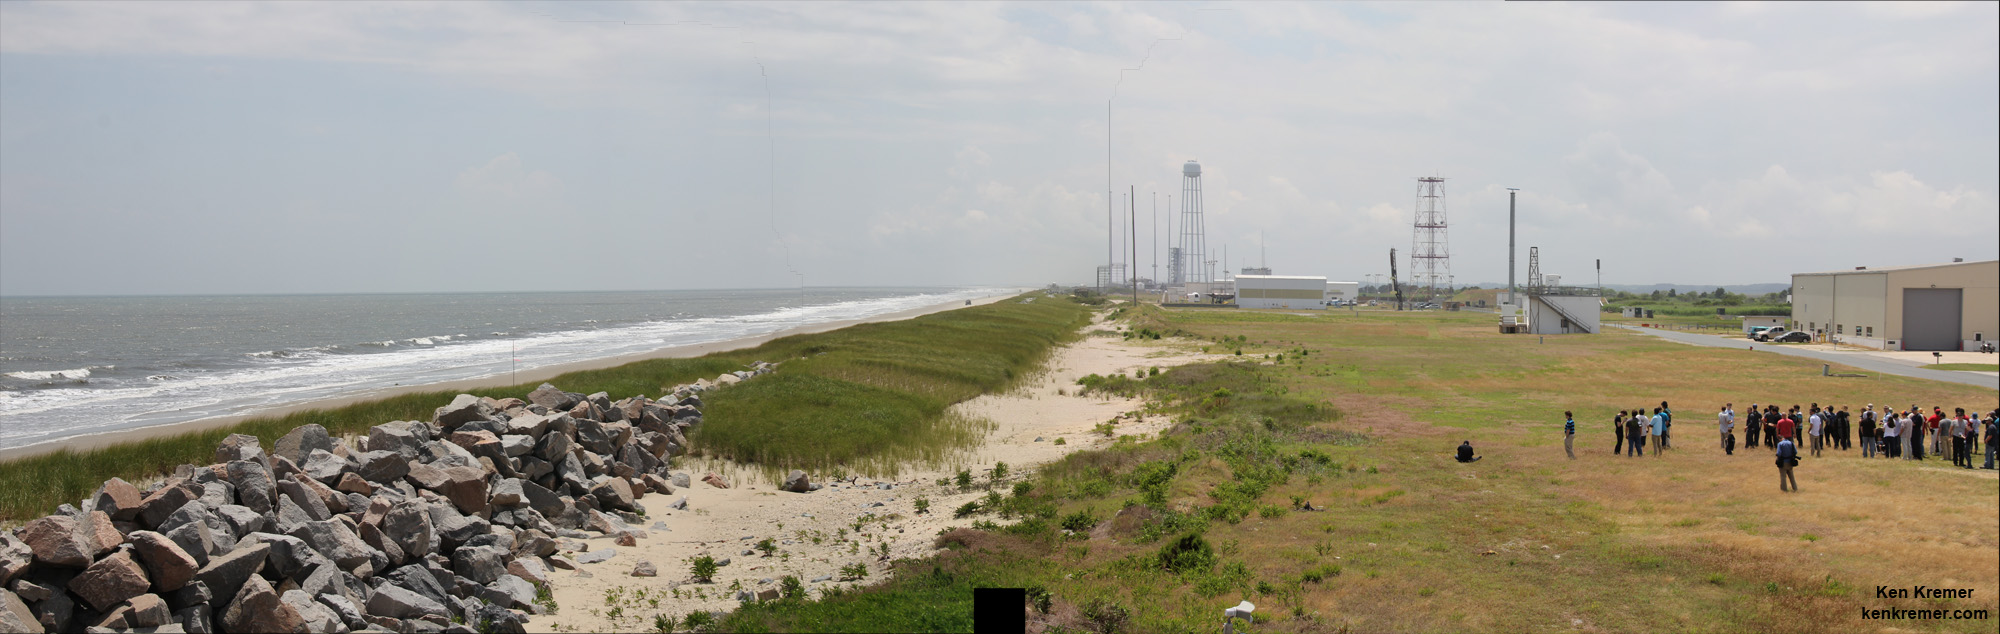 Prelaunch panoramic mosaic view of suborbital Terrier-Improved Orion sounding rocket loaded with student-built RockOn research payloads from NASA’s beachside Wallops Flight Facility along Virginia shoreline. Successful liftoff on June 26, 2014. View of Wallops launch range includes Antares and LADEE launch pads 0A and 0B.  Credit: Ken Kremer - kenkremer.com/AmericaSpace